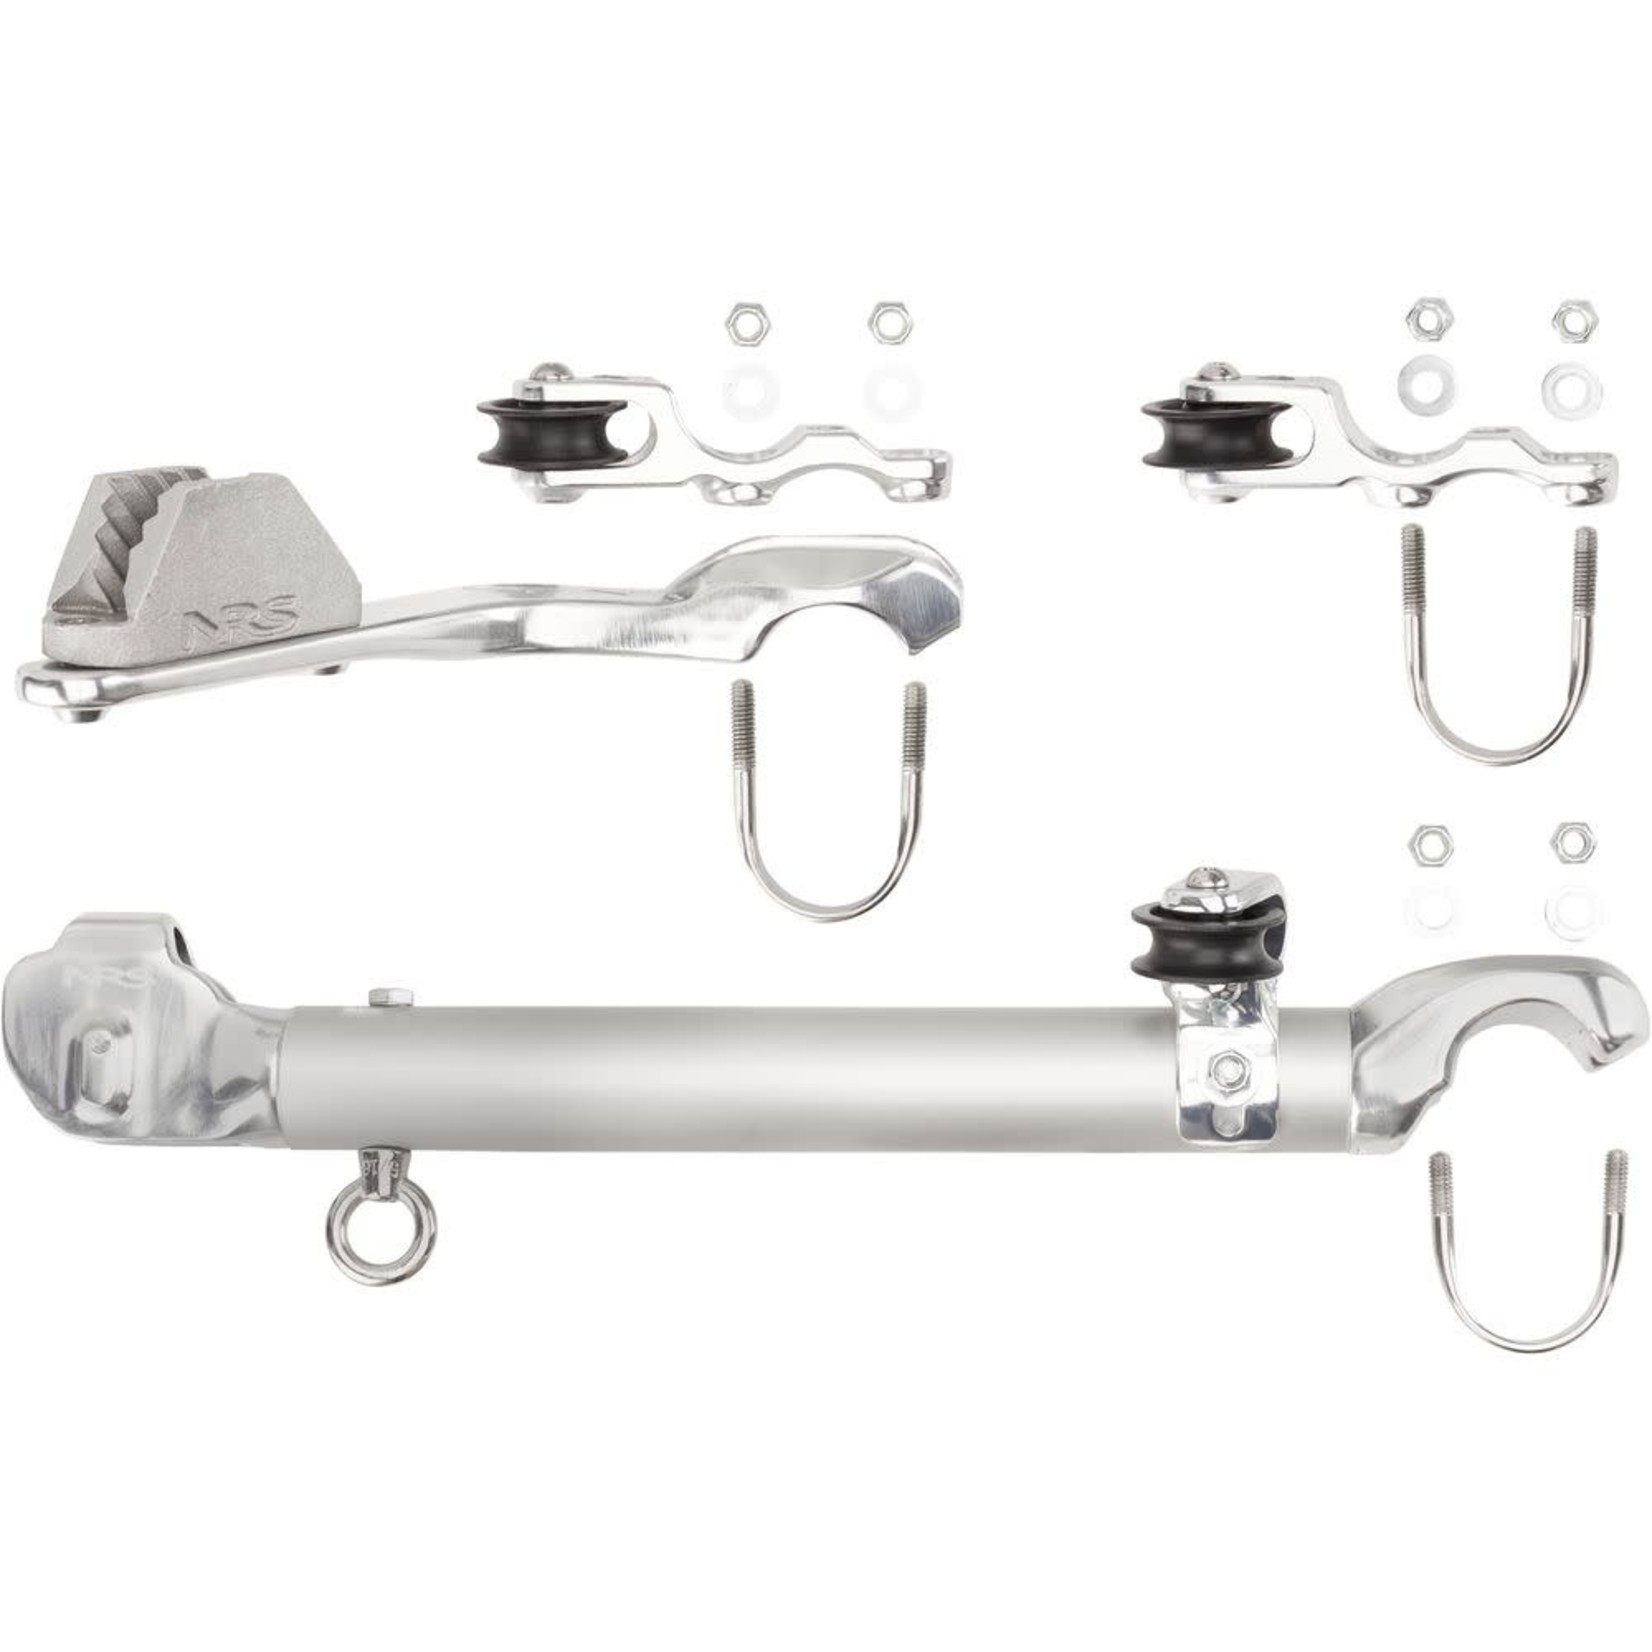 NRS, Inc NRS Frame Anchor System with 2:1